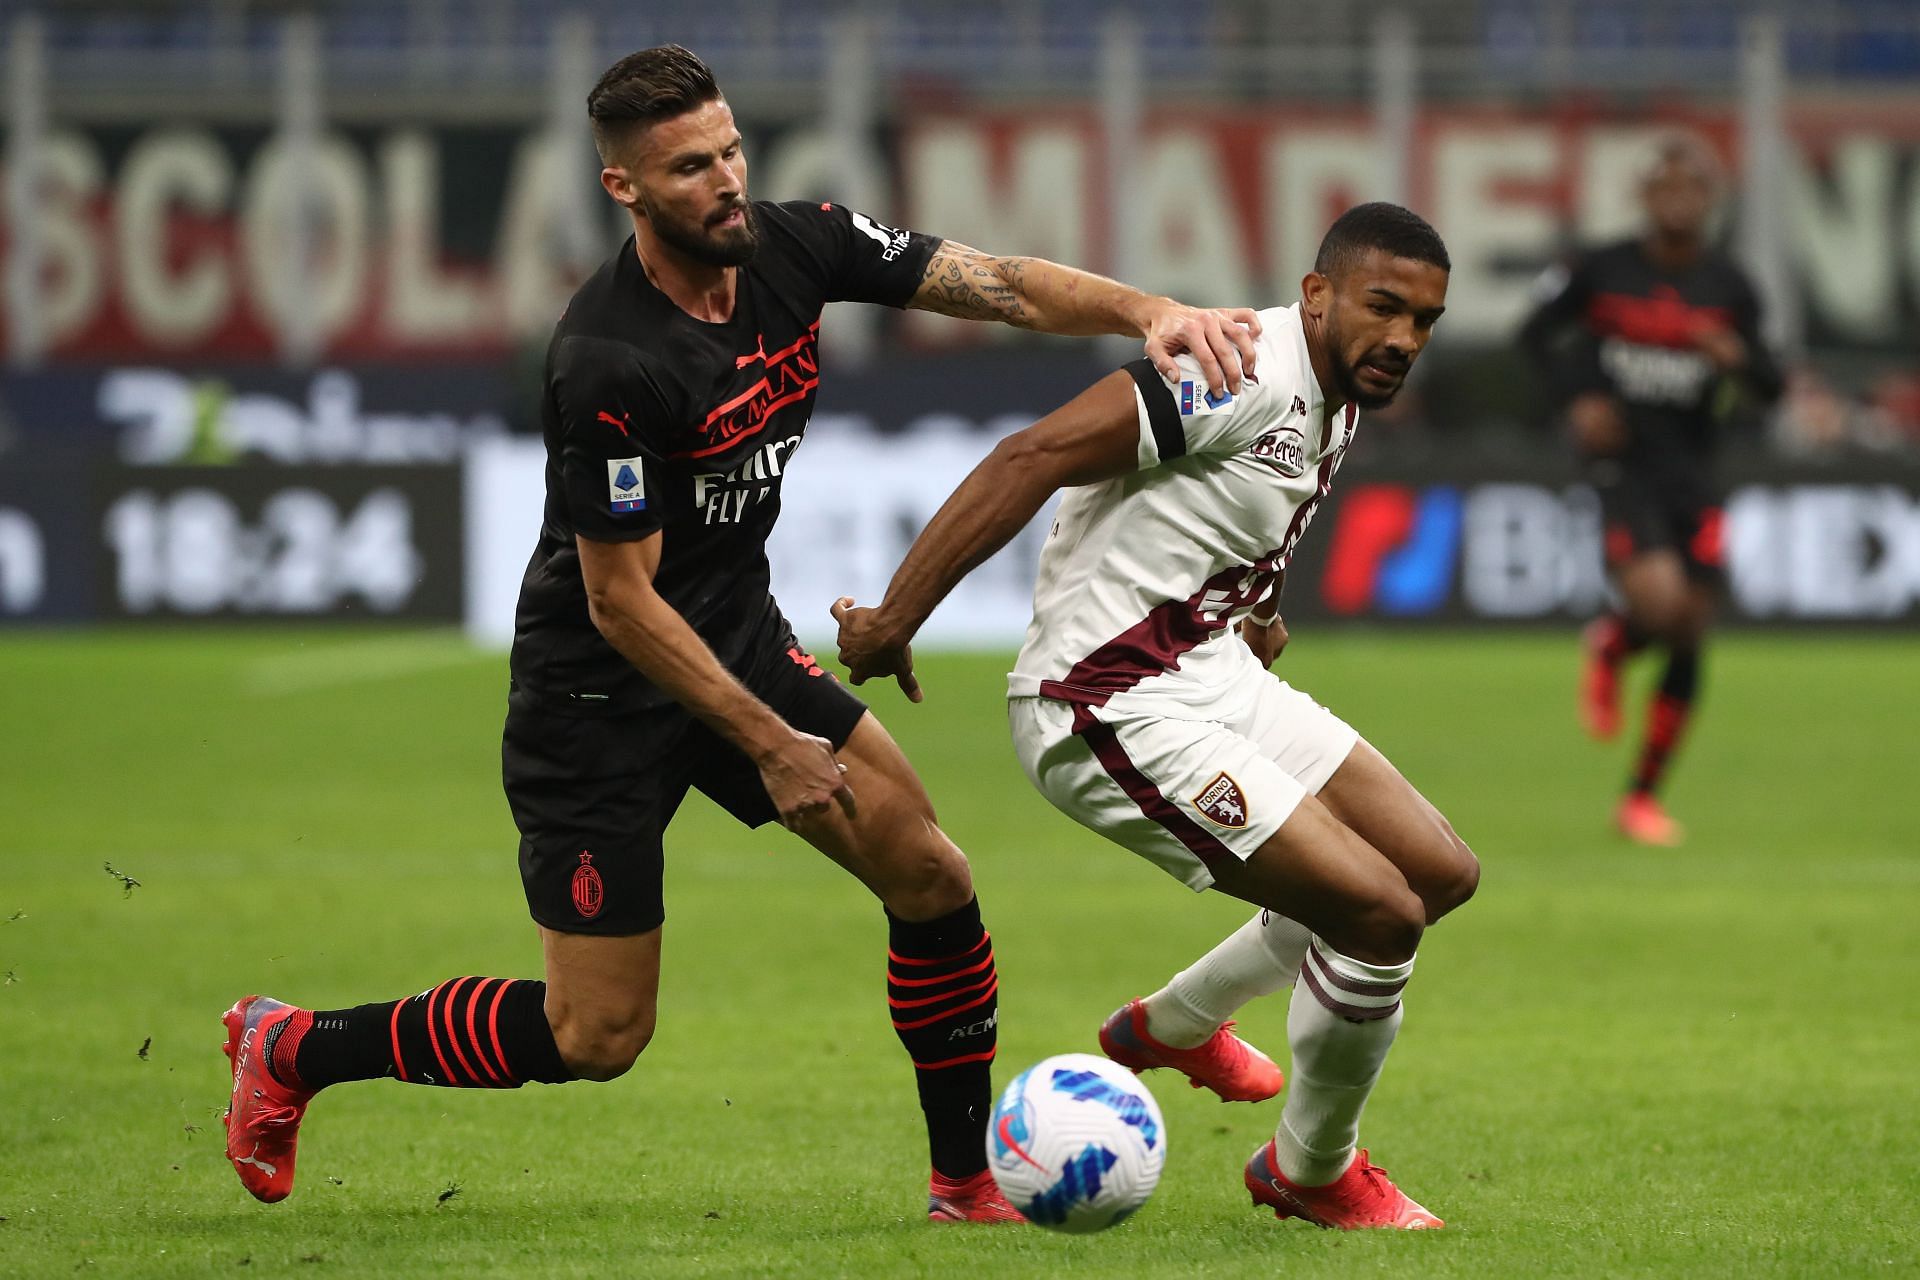 Torino square off against AC Milan in their upcoming Serie A fixture.